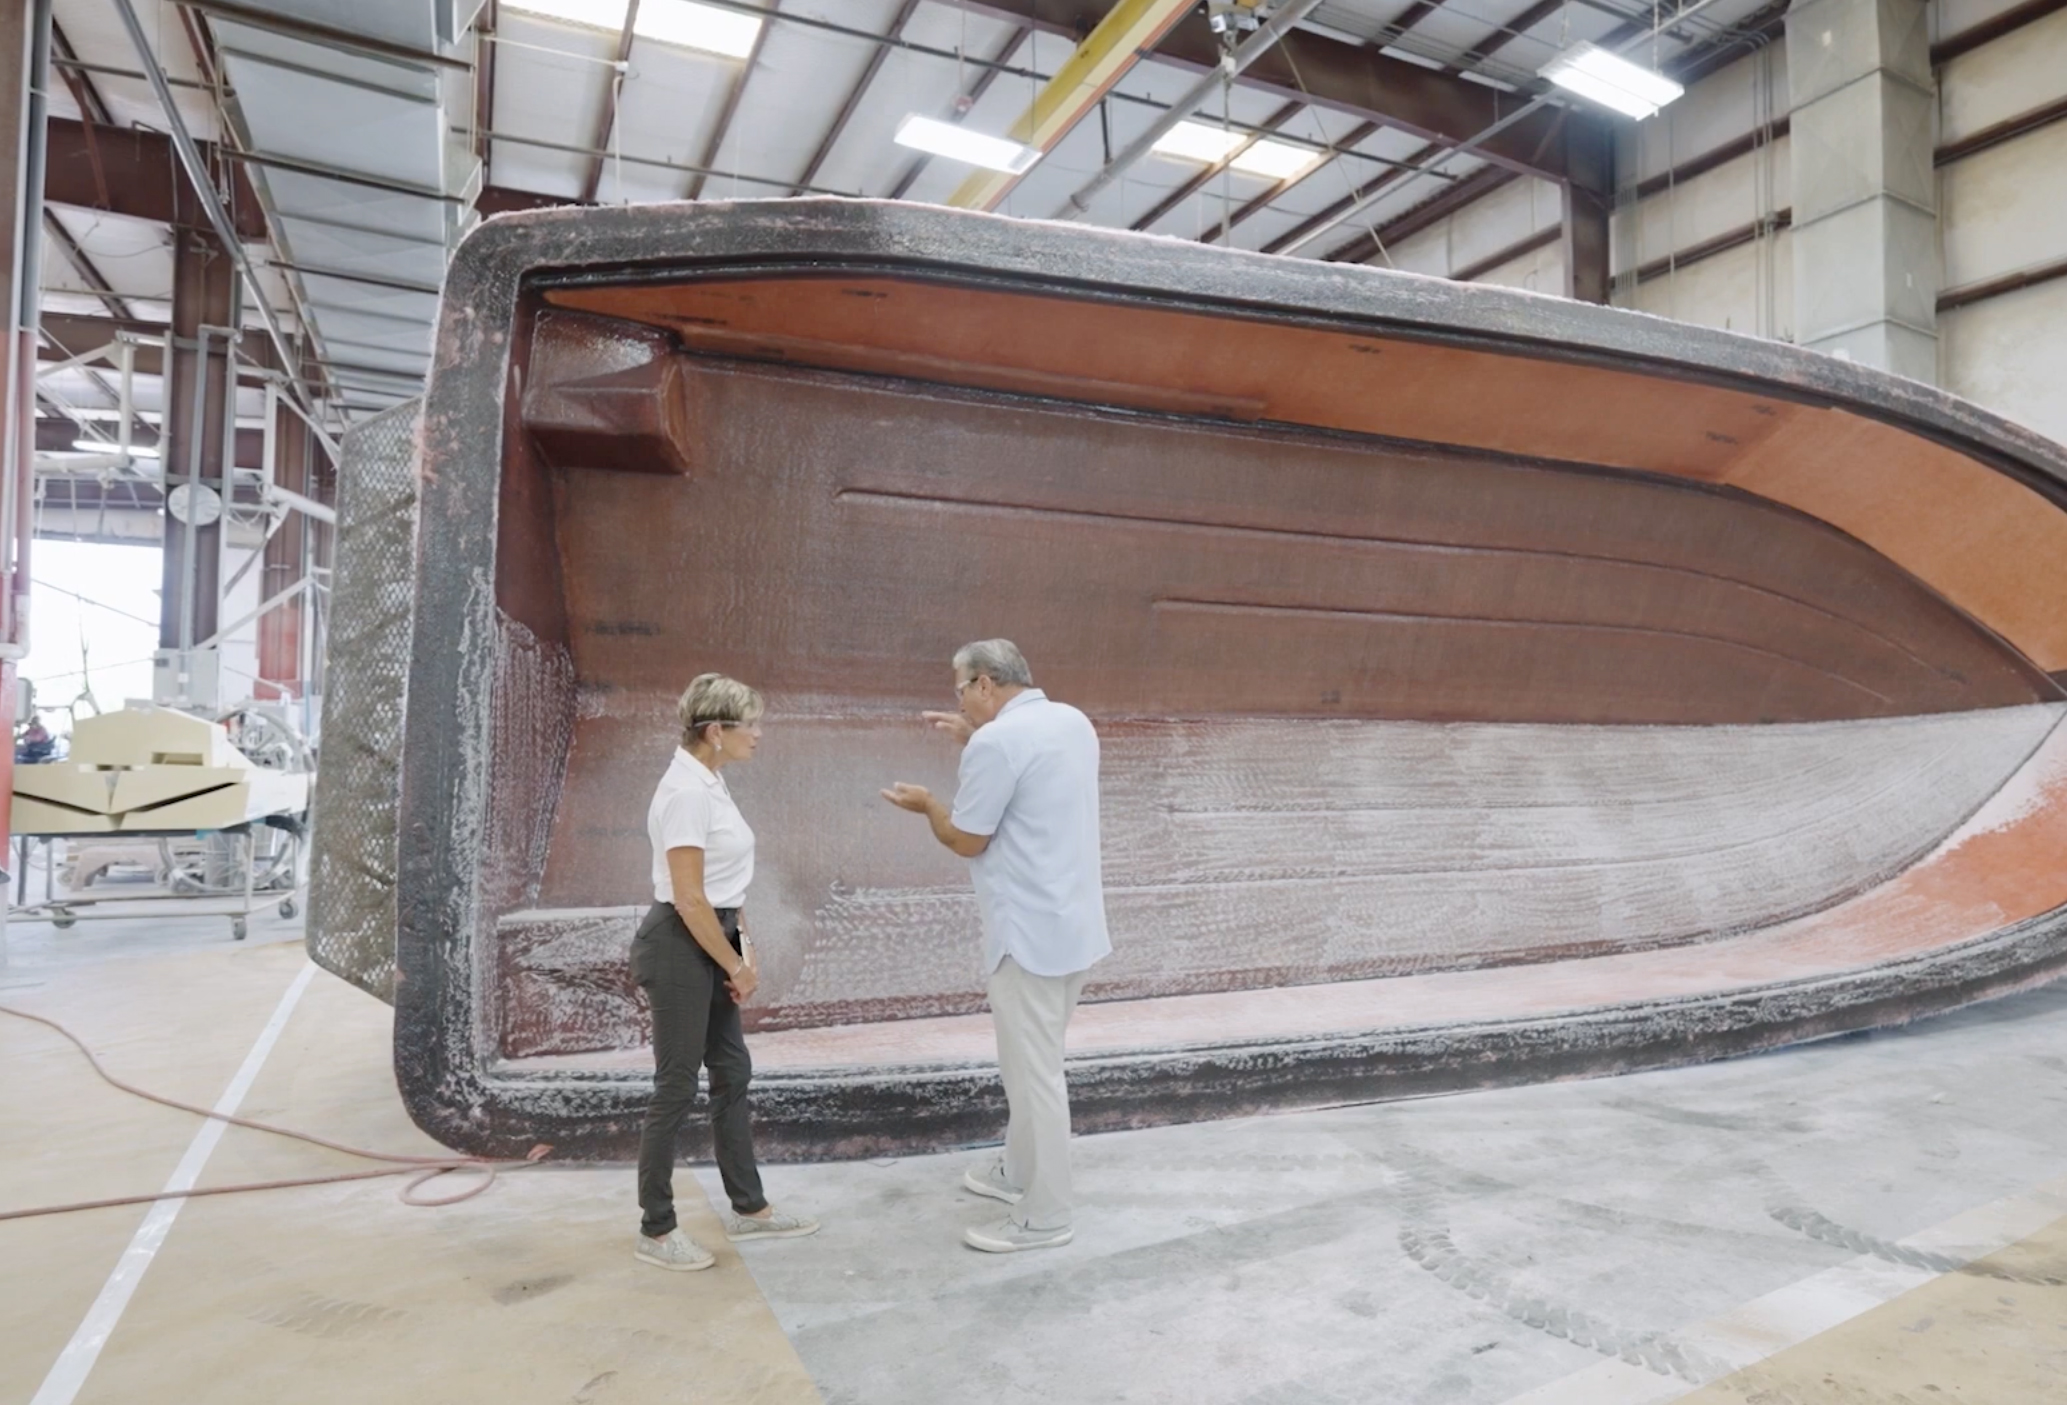 Factory Fridays: How Everglades Builds World Class Offshore Fishing Boats